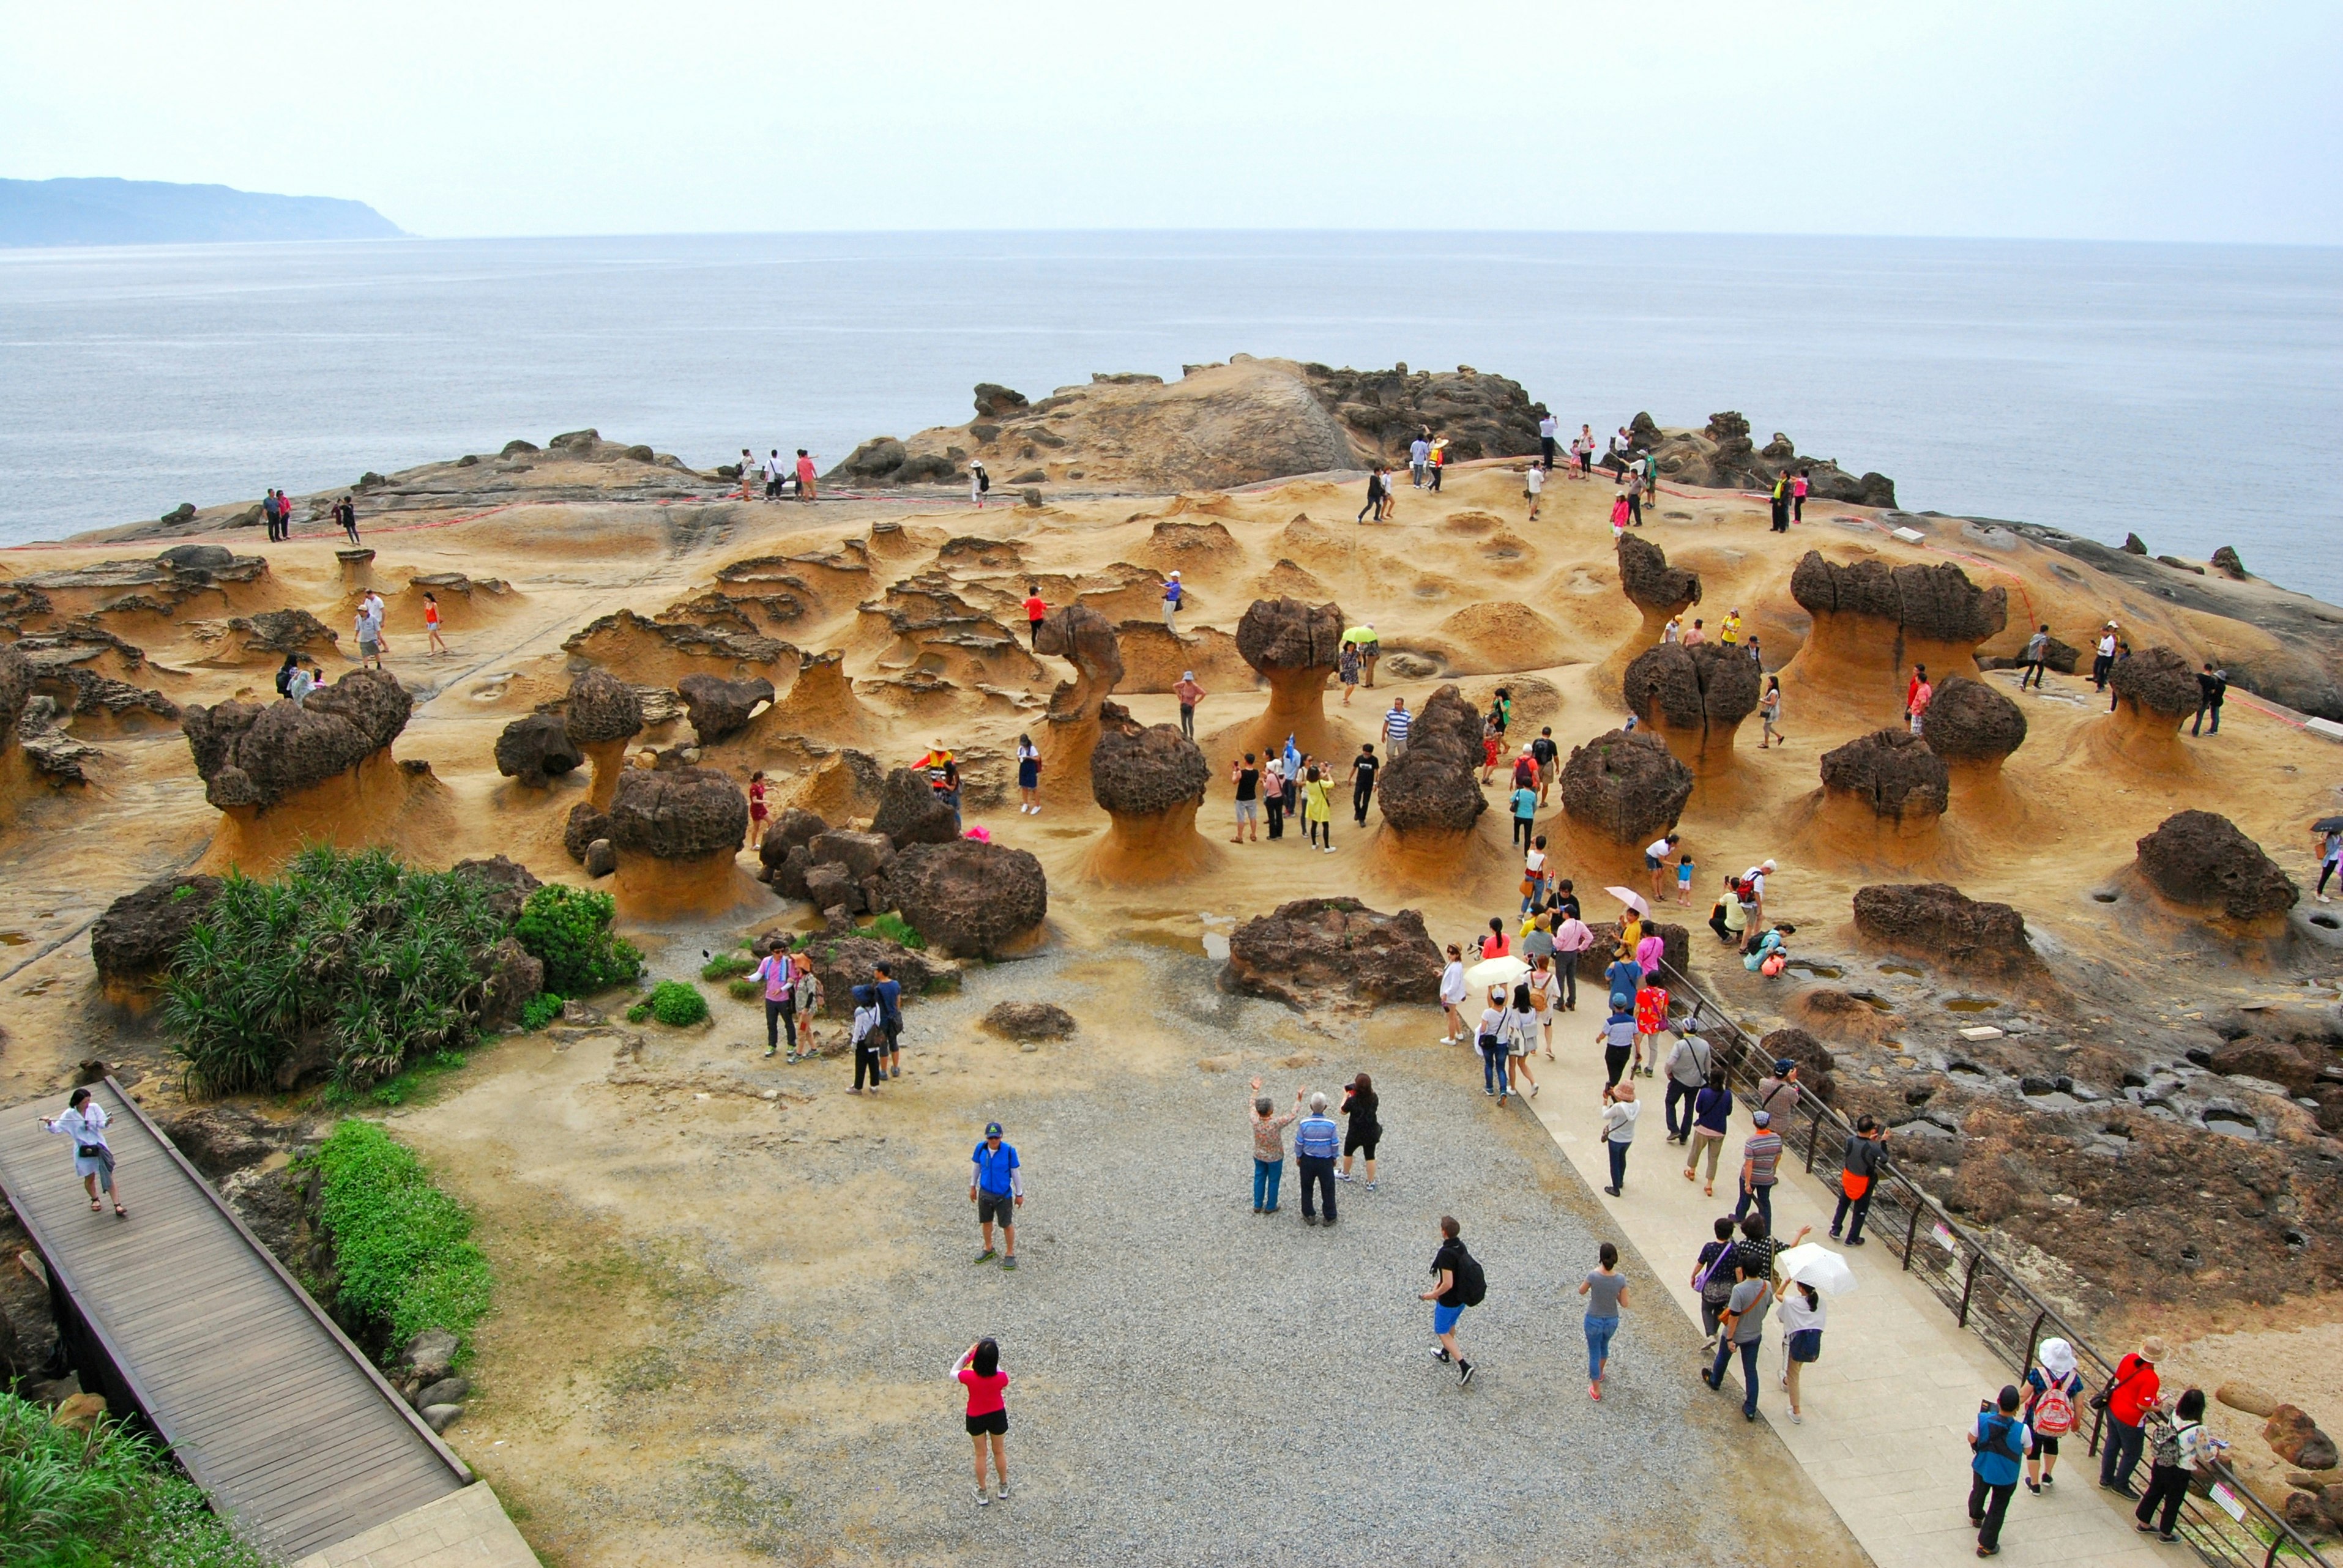 An aerial shot of tourists looking at the unusually shaped rocks, eroded by the ocean, at Yehliu Geopark, Taiwan